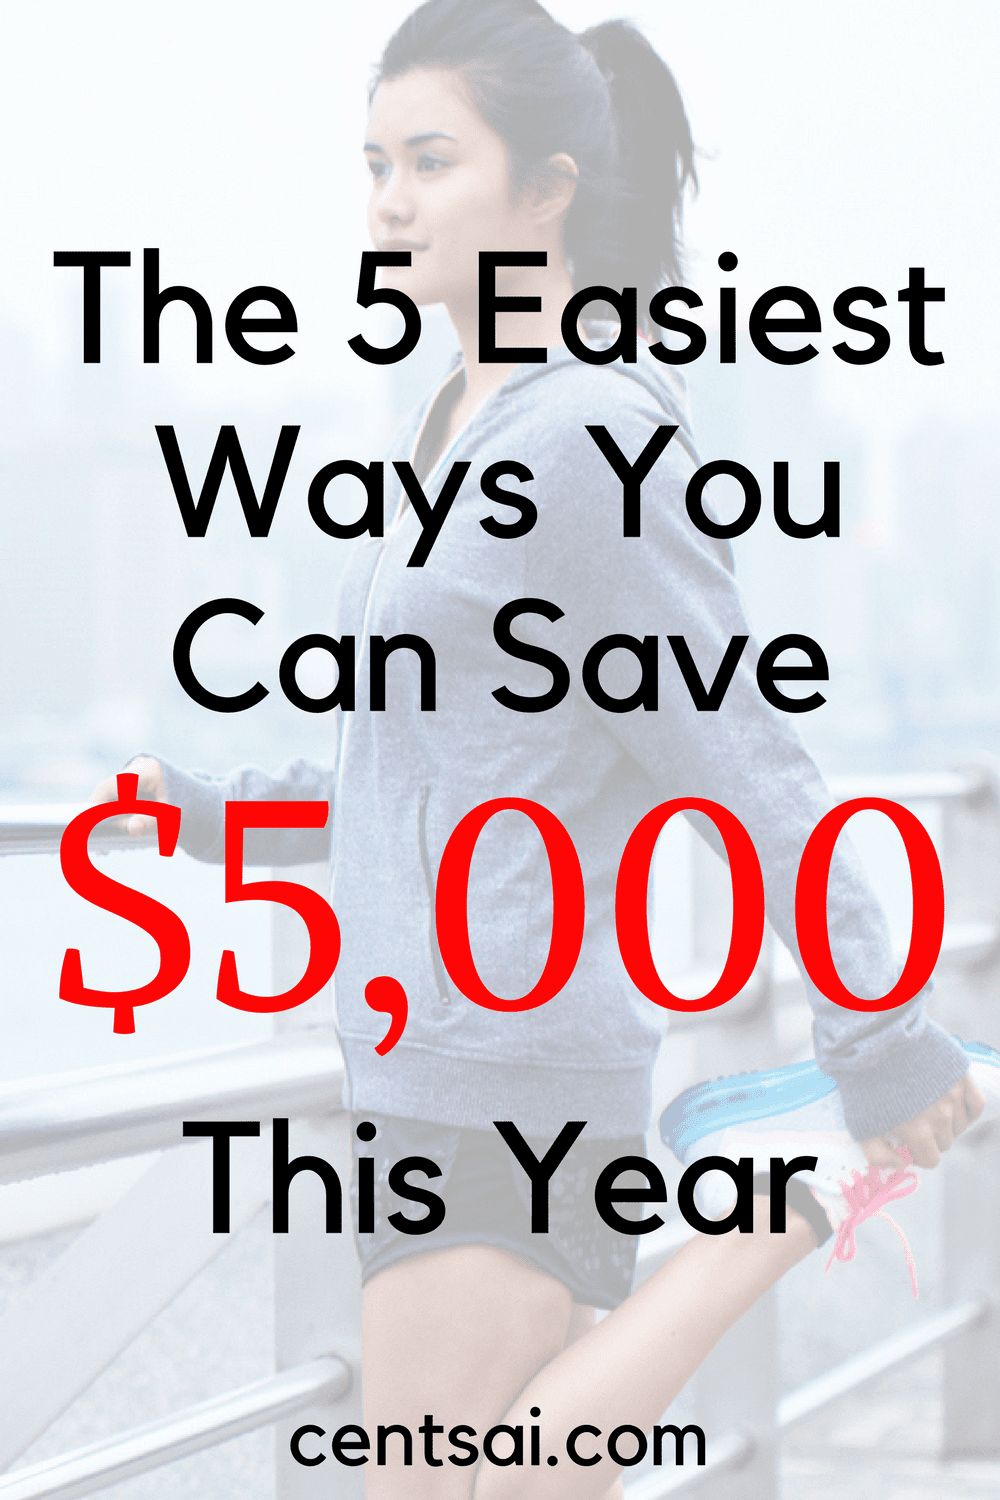 The 5 Easiest Ways You Can Save $5,000 This Year. These are easy steps to save money this year!